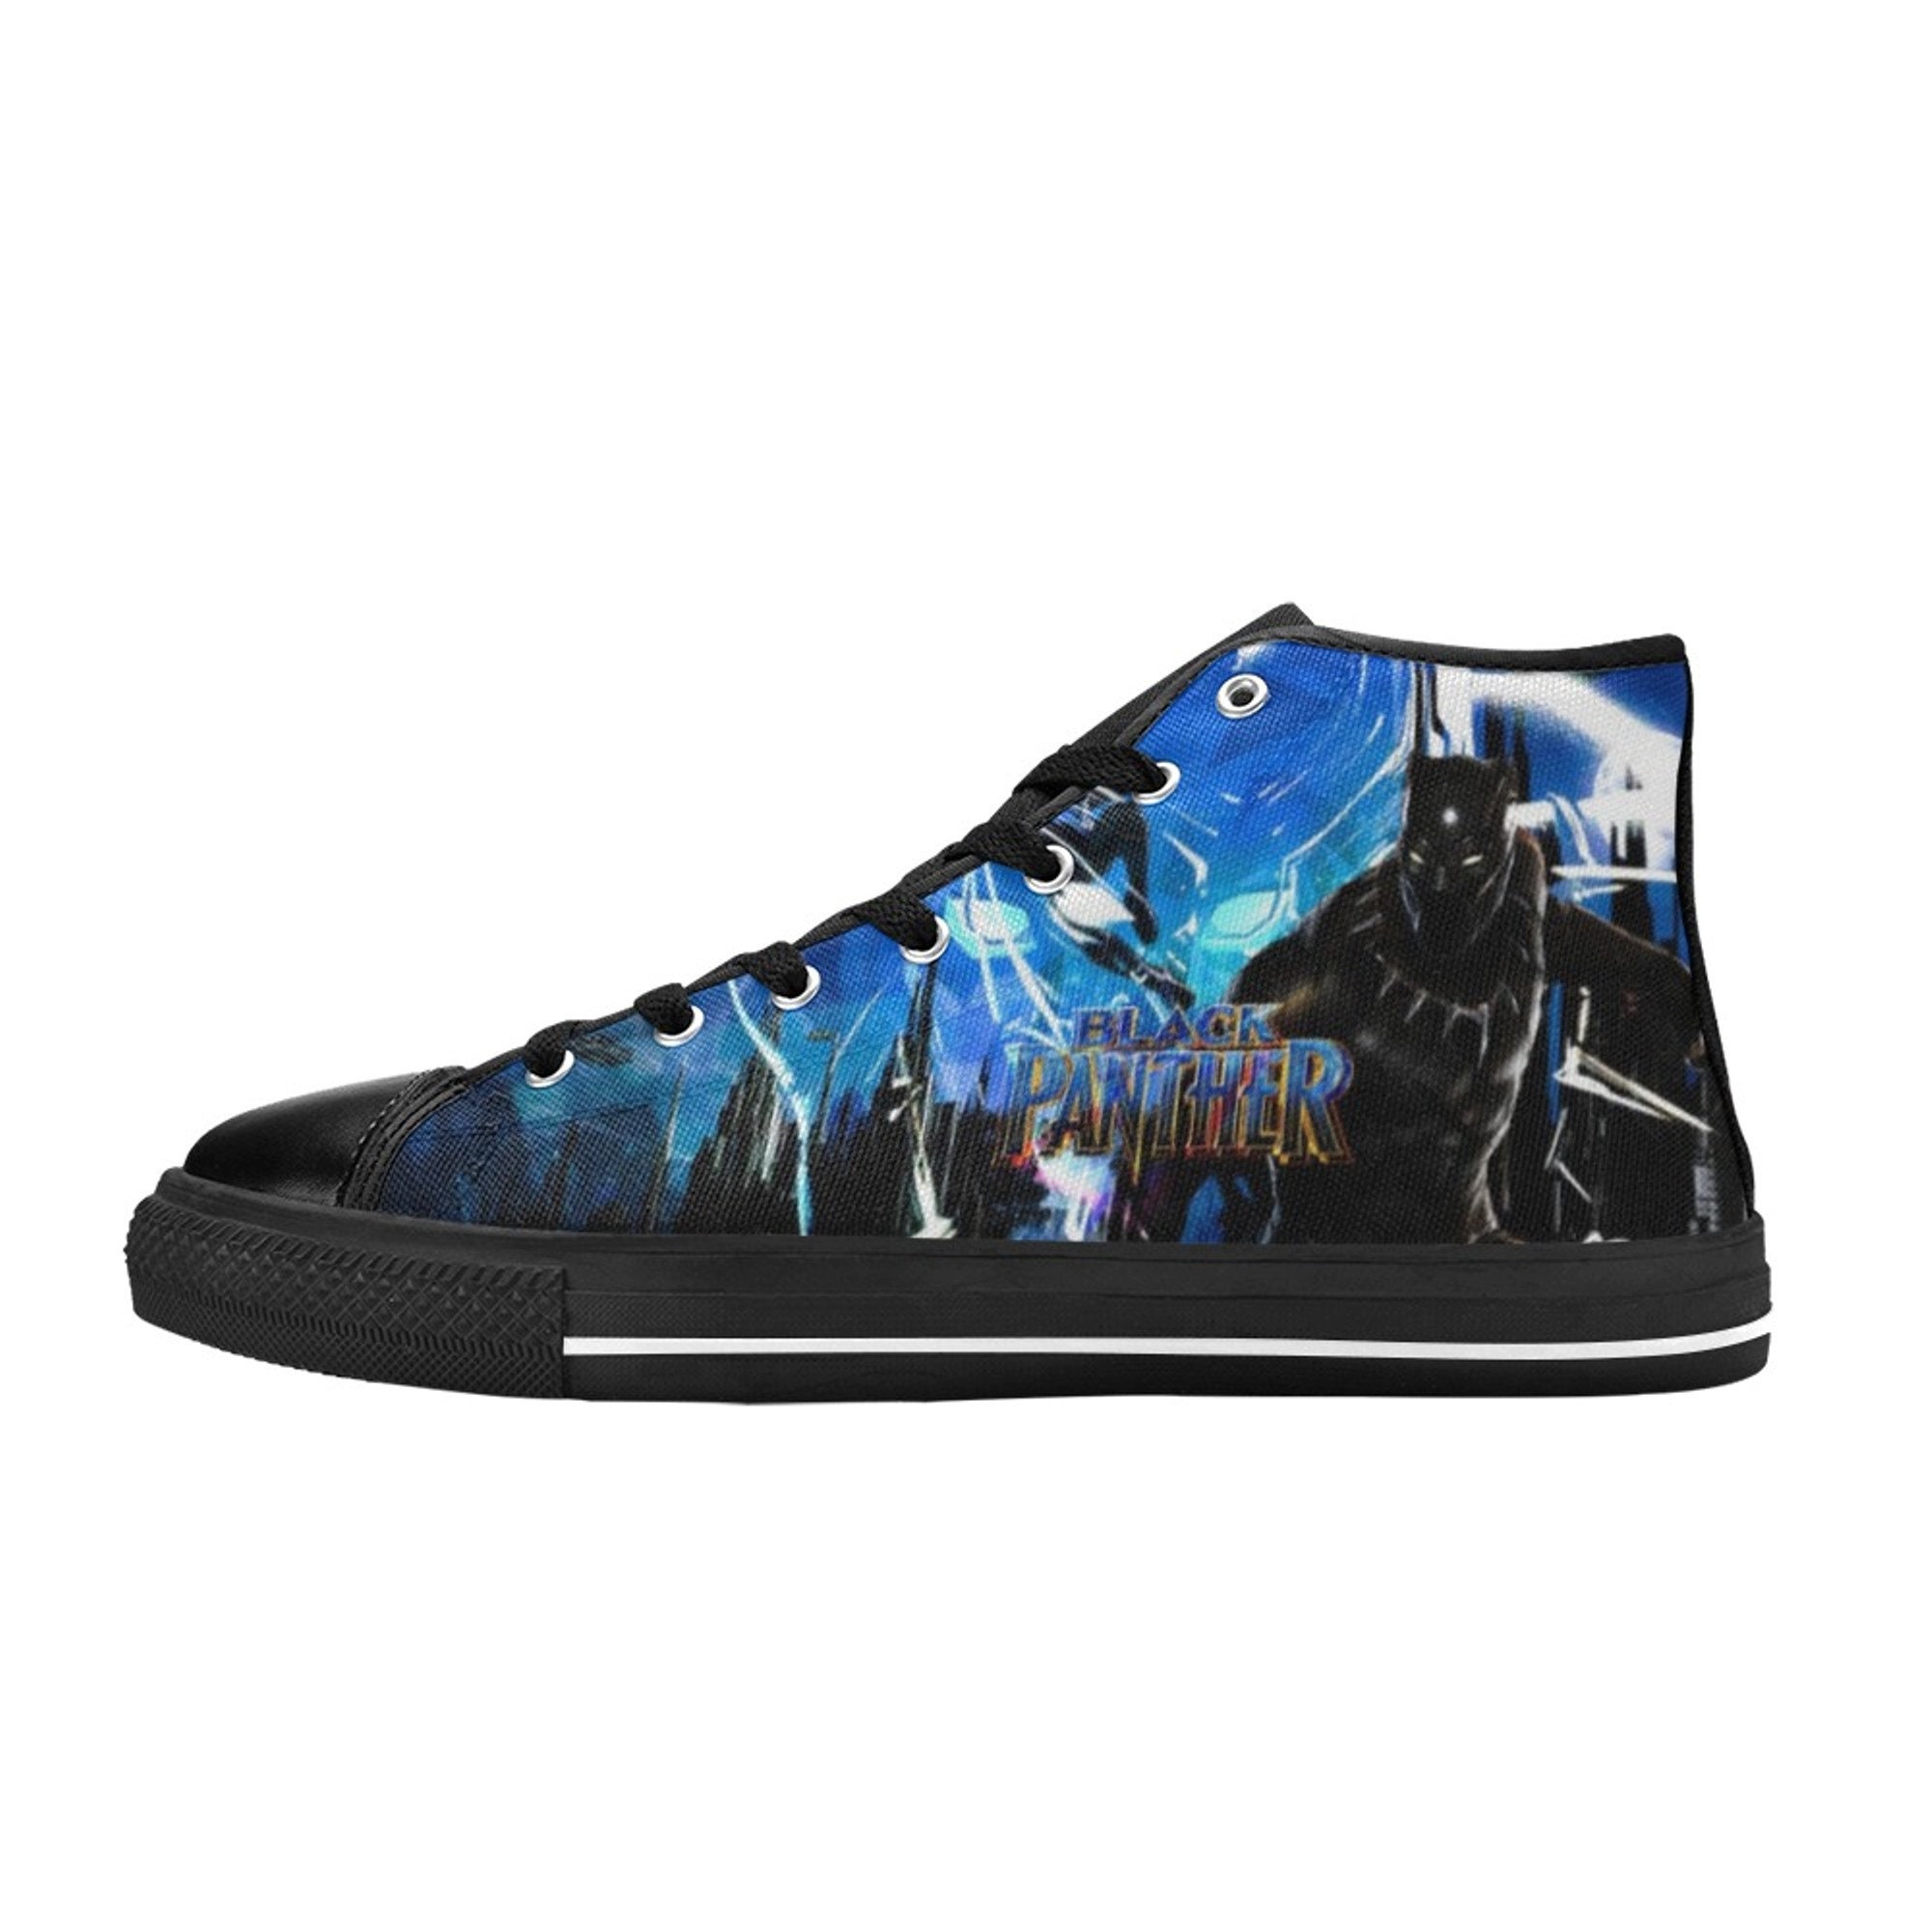 The Black Panther Wakanda Forever themed custom shoes sneakers for fan adults kids women men